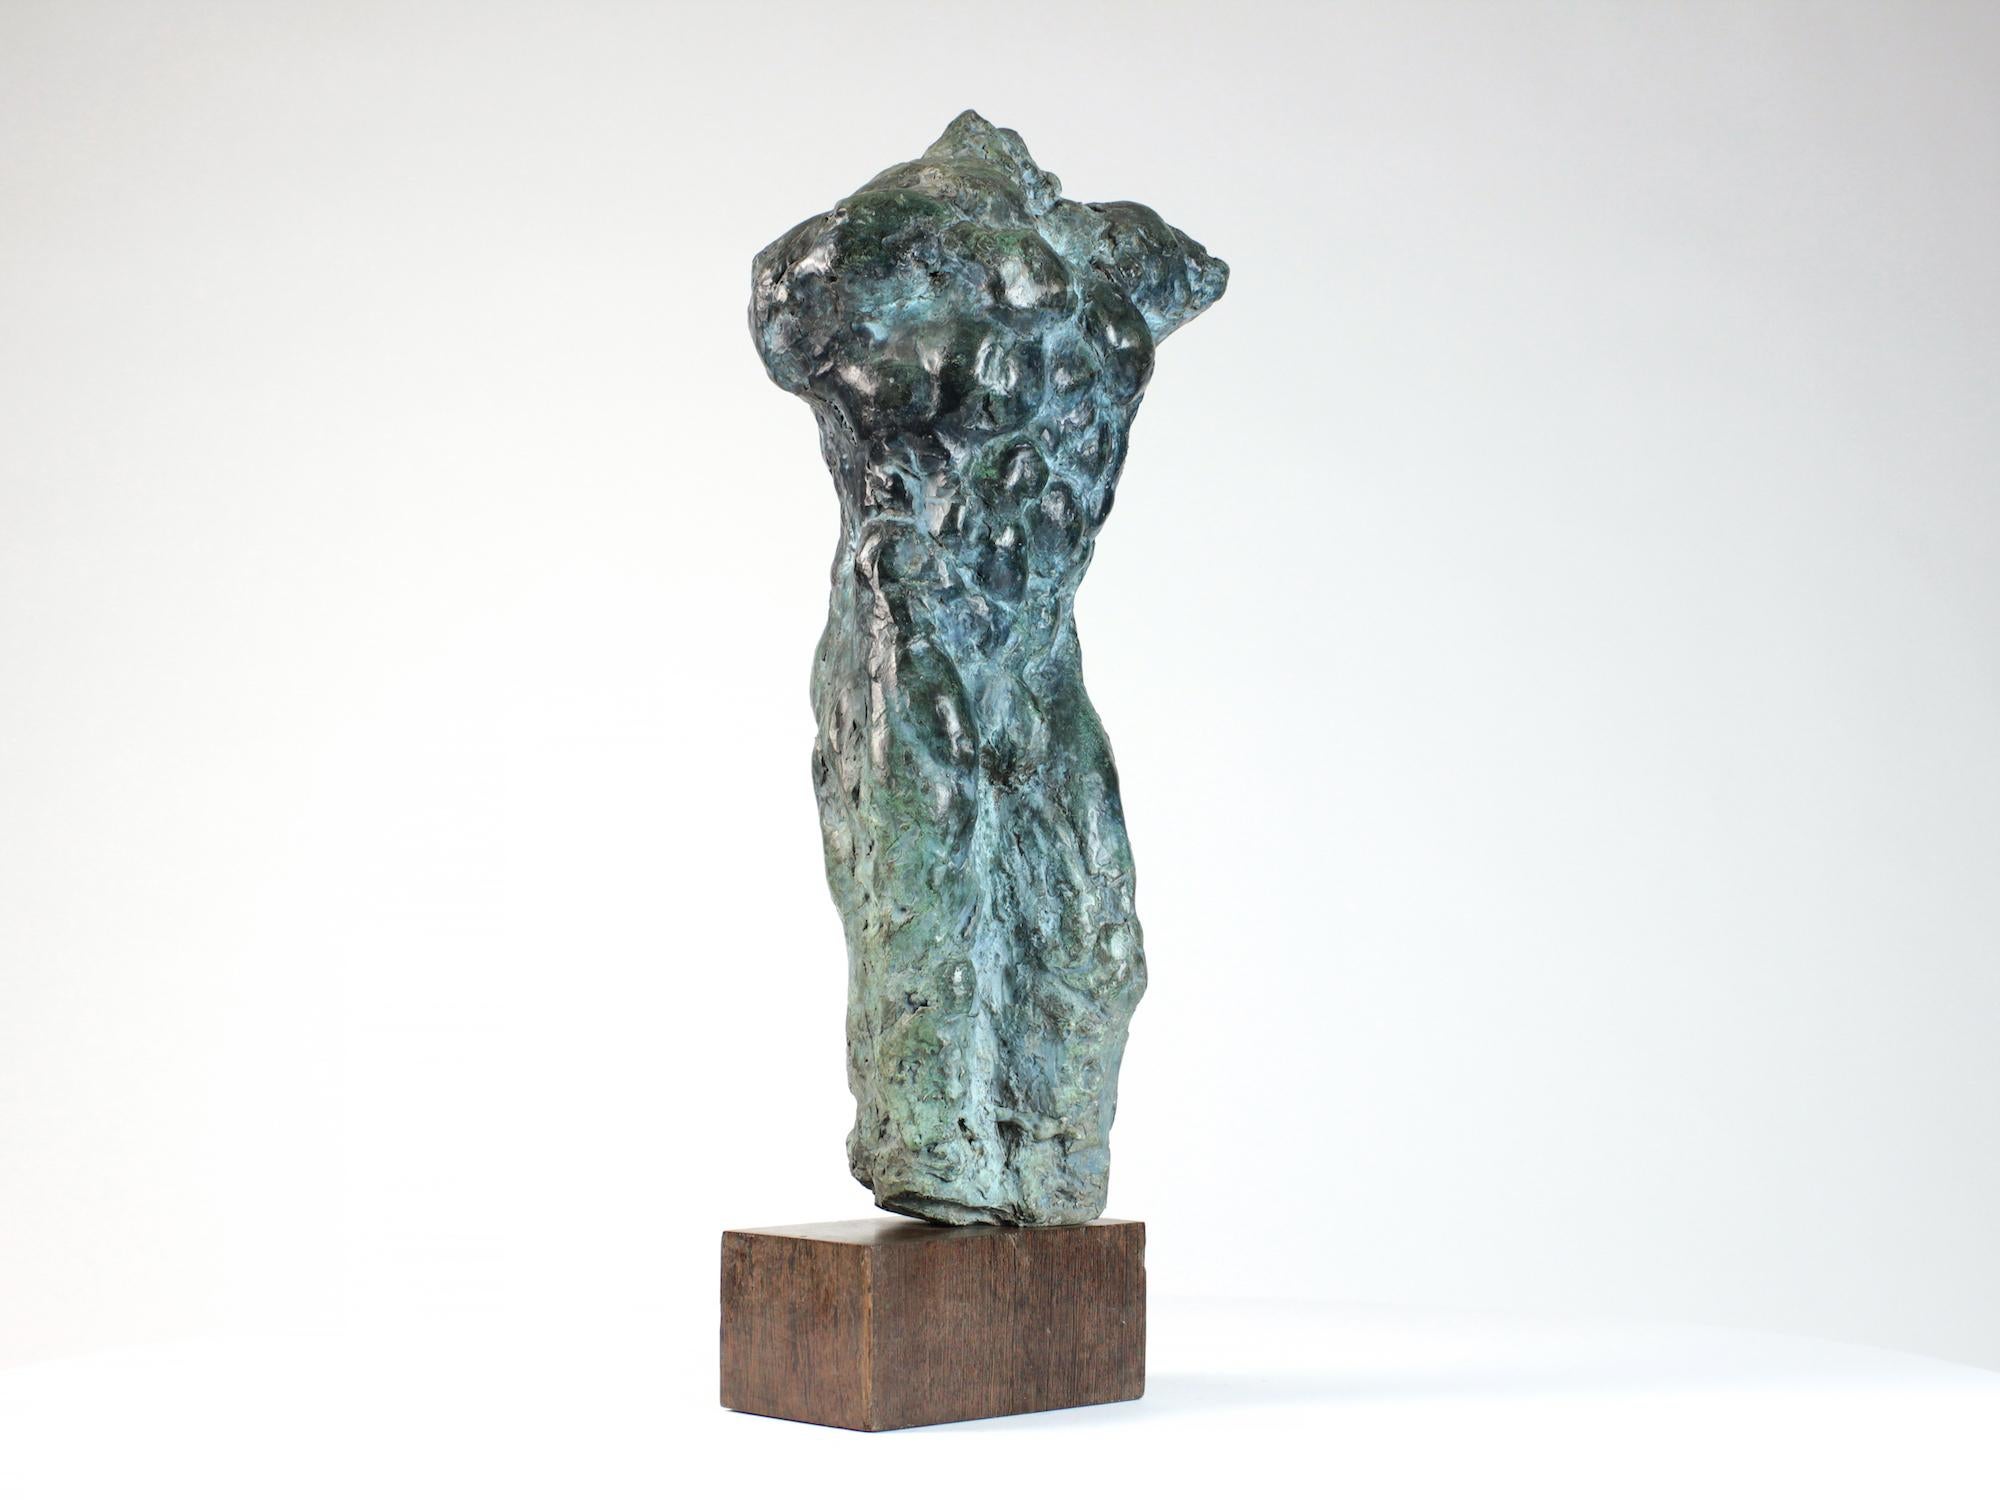 Lancelot II is a bronze sculpture by contemporary artist Yann Guillon, dimensions are 50 × 25 × 17 cm (19.7 × 9.8 × 6.7 in). Height of the sculpture with the base: 60 cm (23.6 in). 
The sculpture is signed and numbered, it is part of a limited